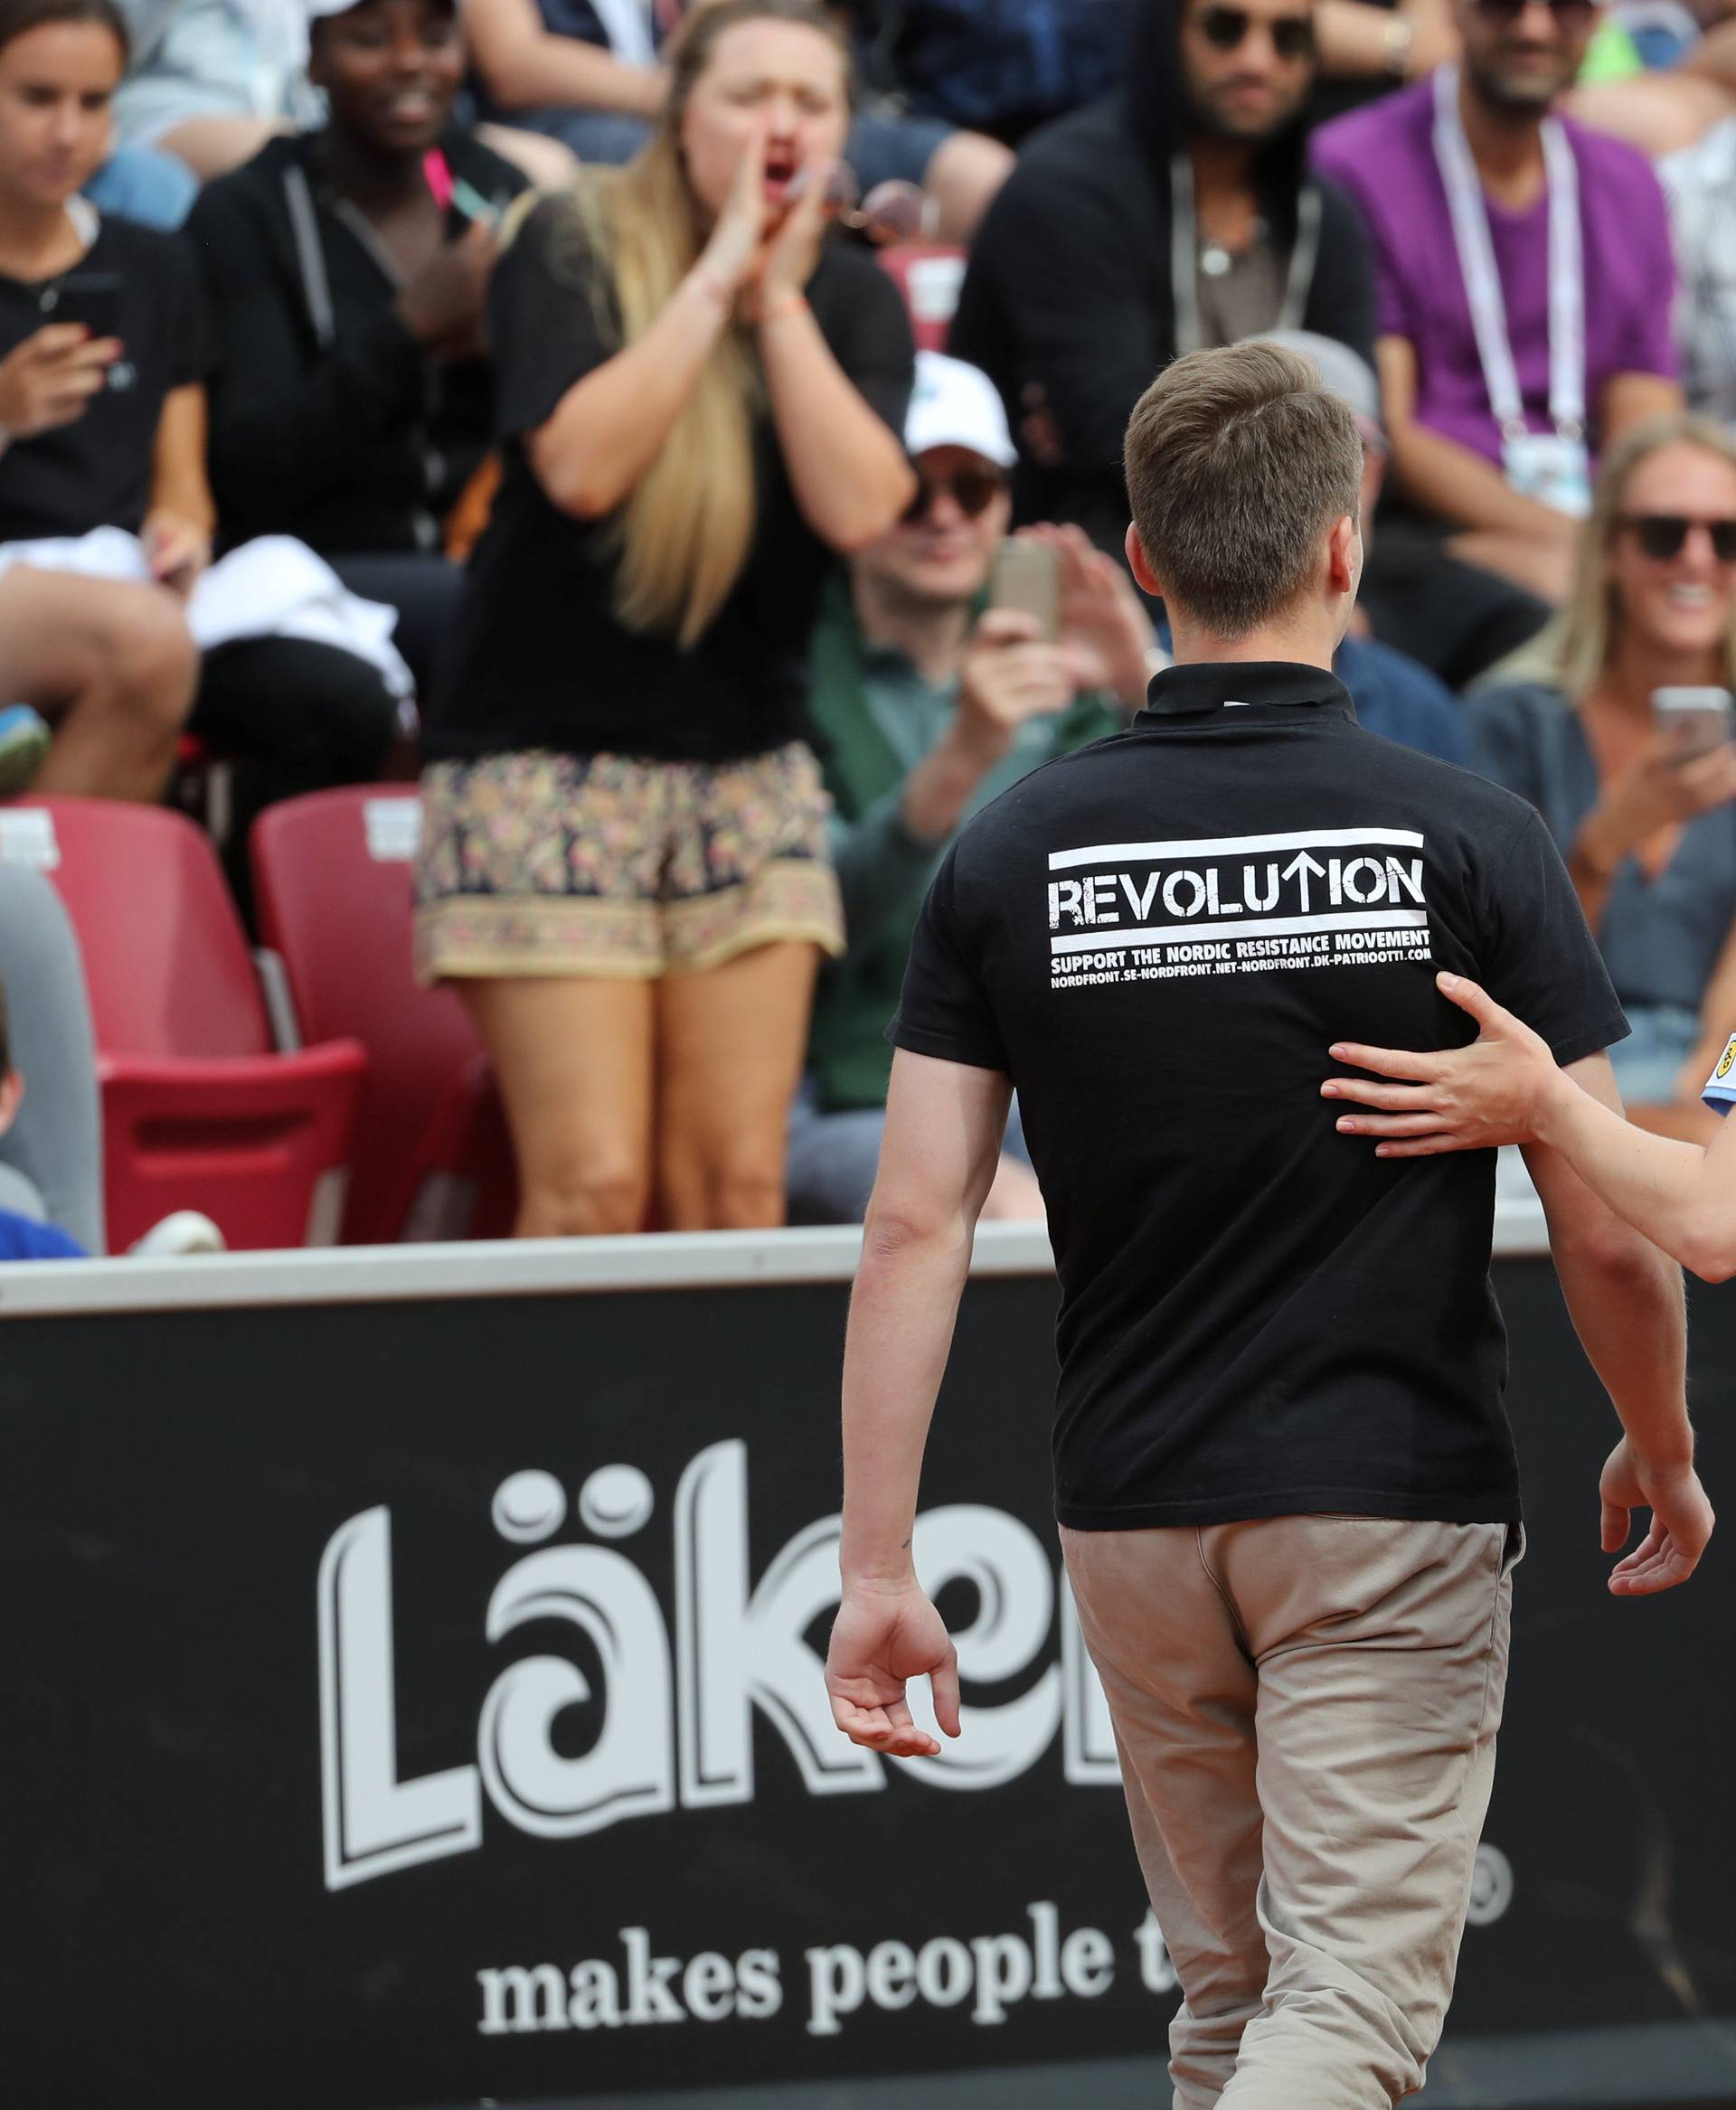 A man is escorted out of the court after raising his right fist during the ATP tennis tournament Swedish Open semi-final match between Fernando Verdasco of Spain and David Ferrer of Spain, in Bastad